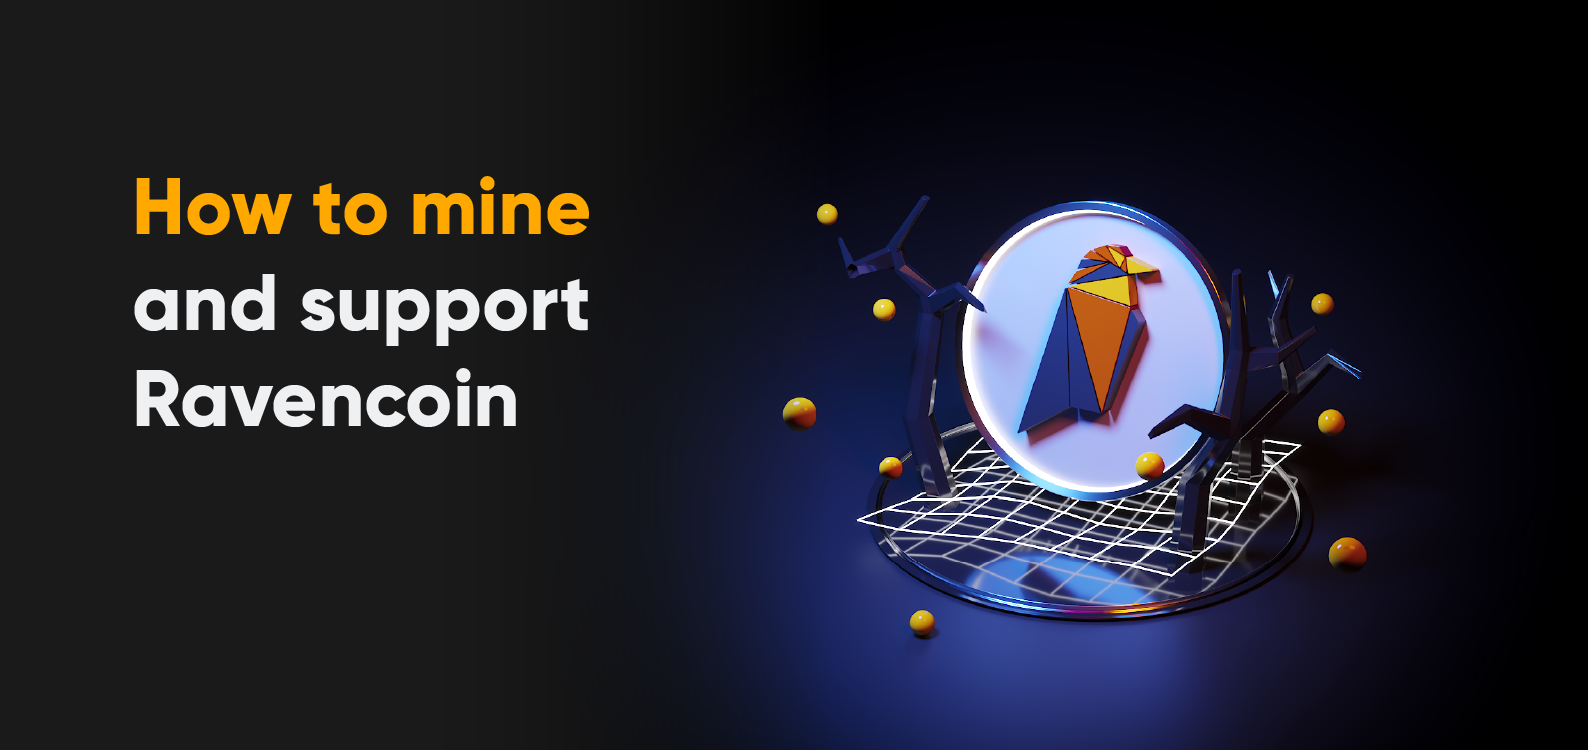 HiveOS — How to mine and support Ravencoin